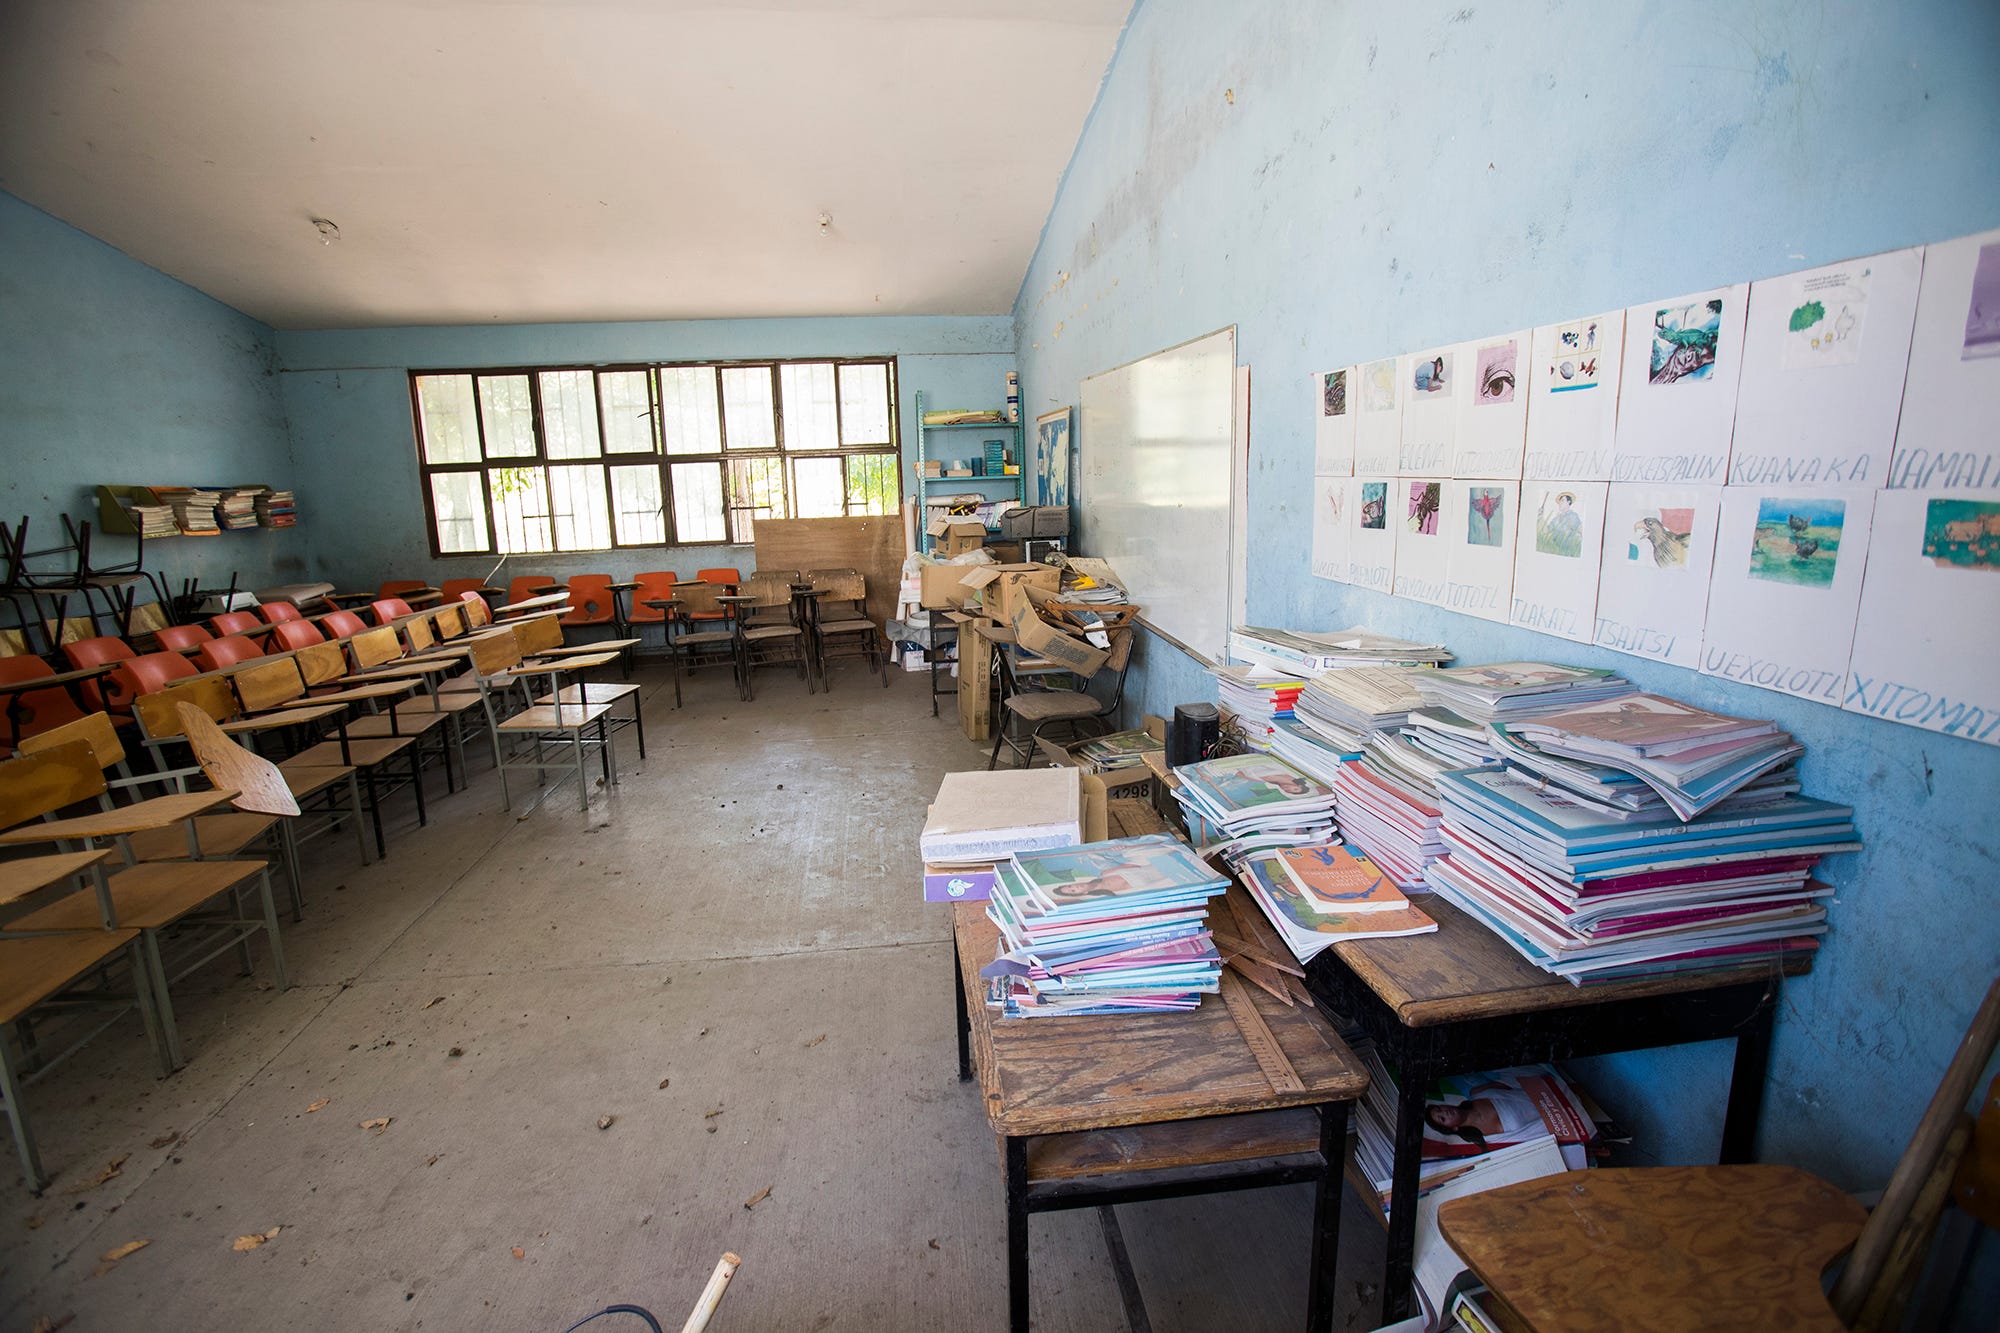 A classroom in Quetzalcoatlán de las Palmas remains empty. The teacher seldom visits after violence ravaged the community in 2016.